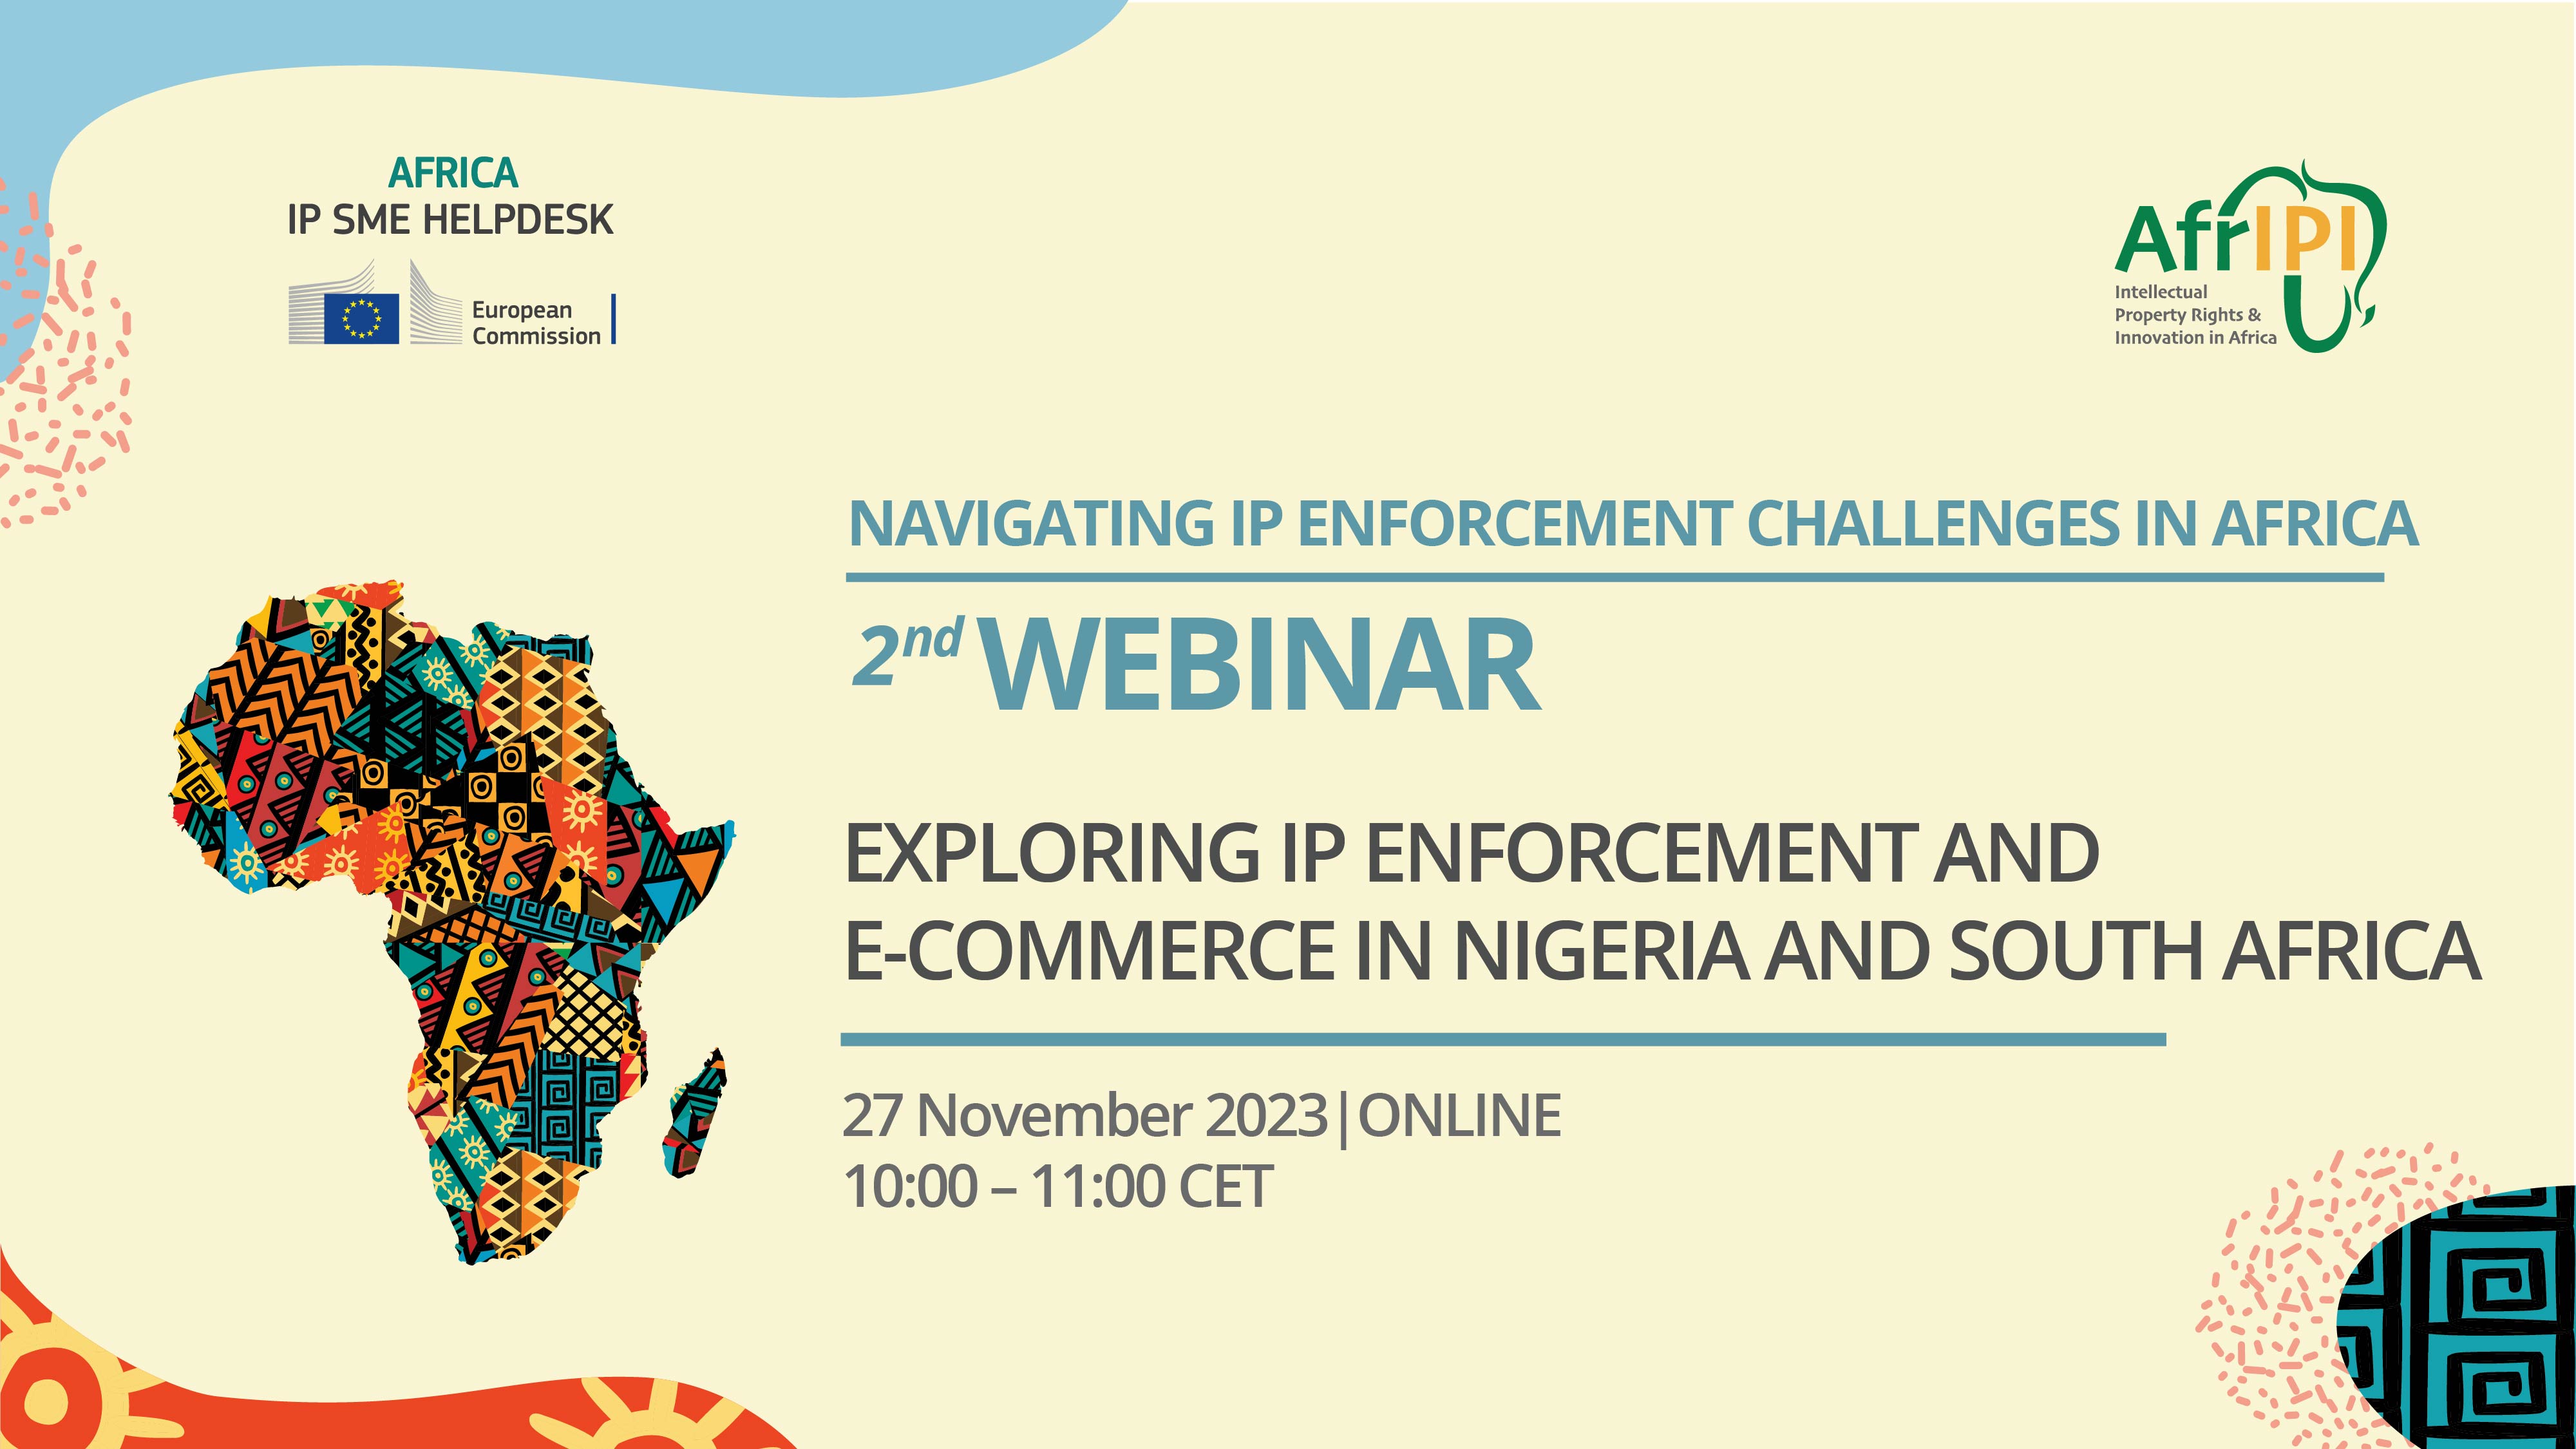 Exploring IP enforcement and e-commerce in Nigeria and South Africa: Africa IP SME Helpdesk webinar series